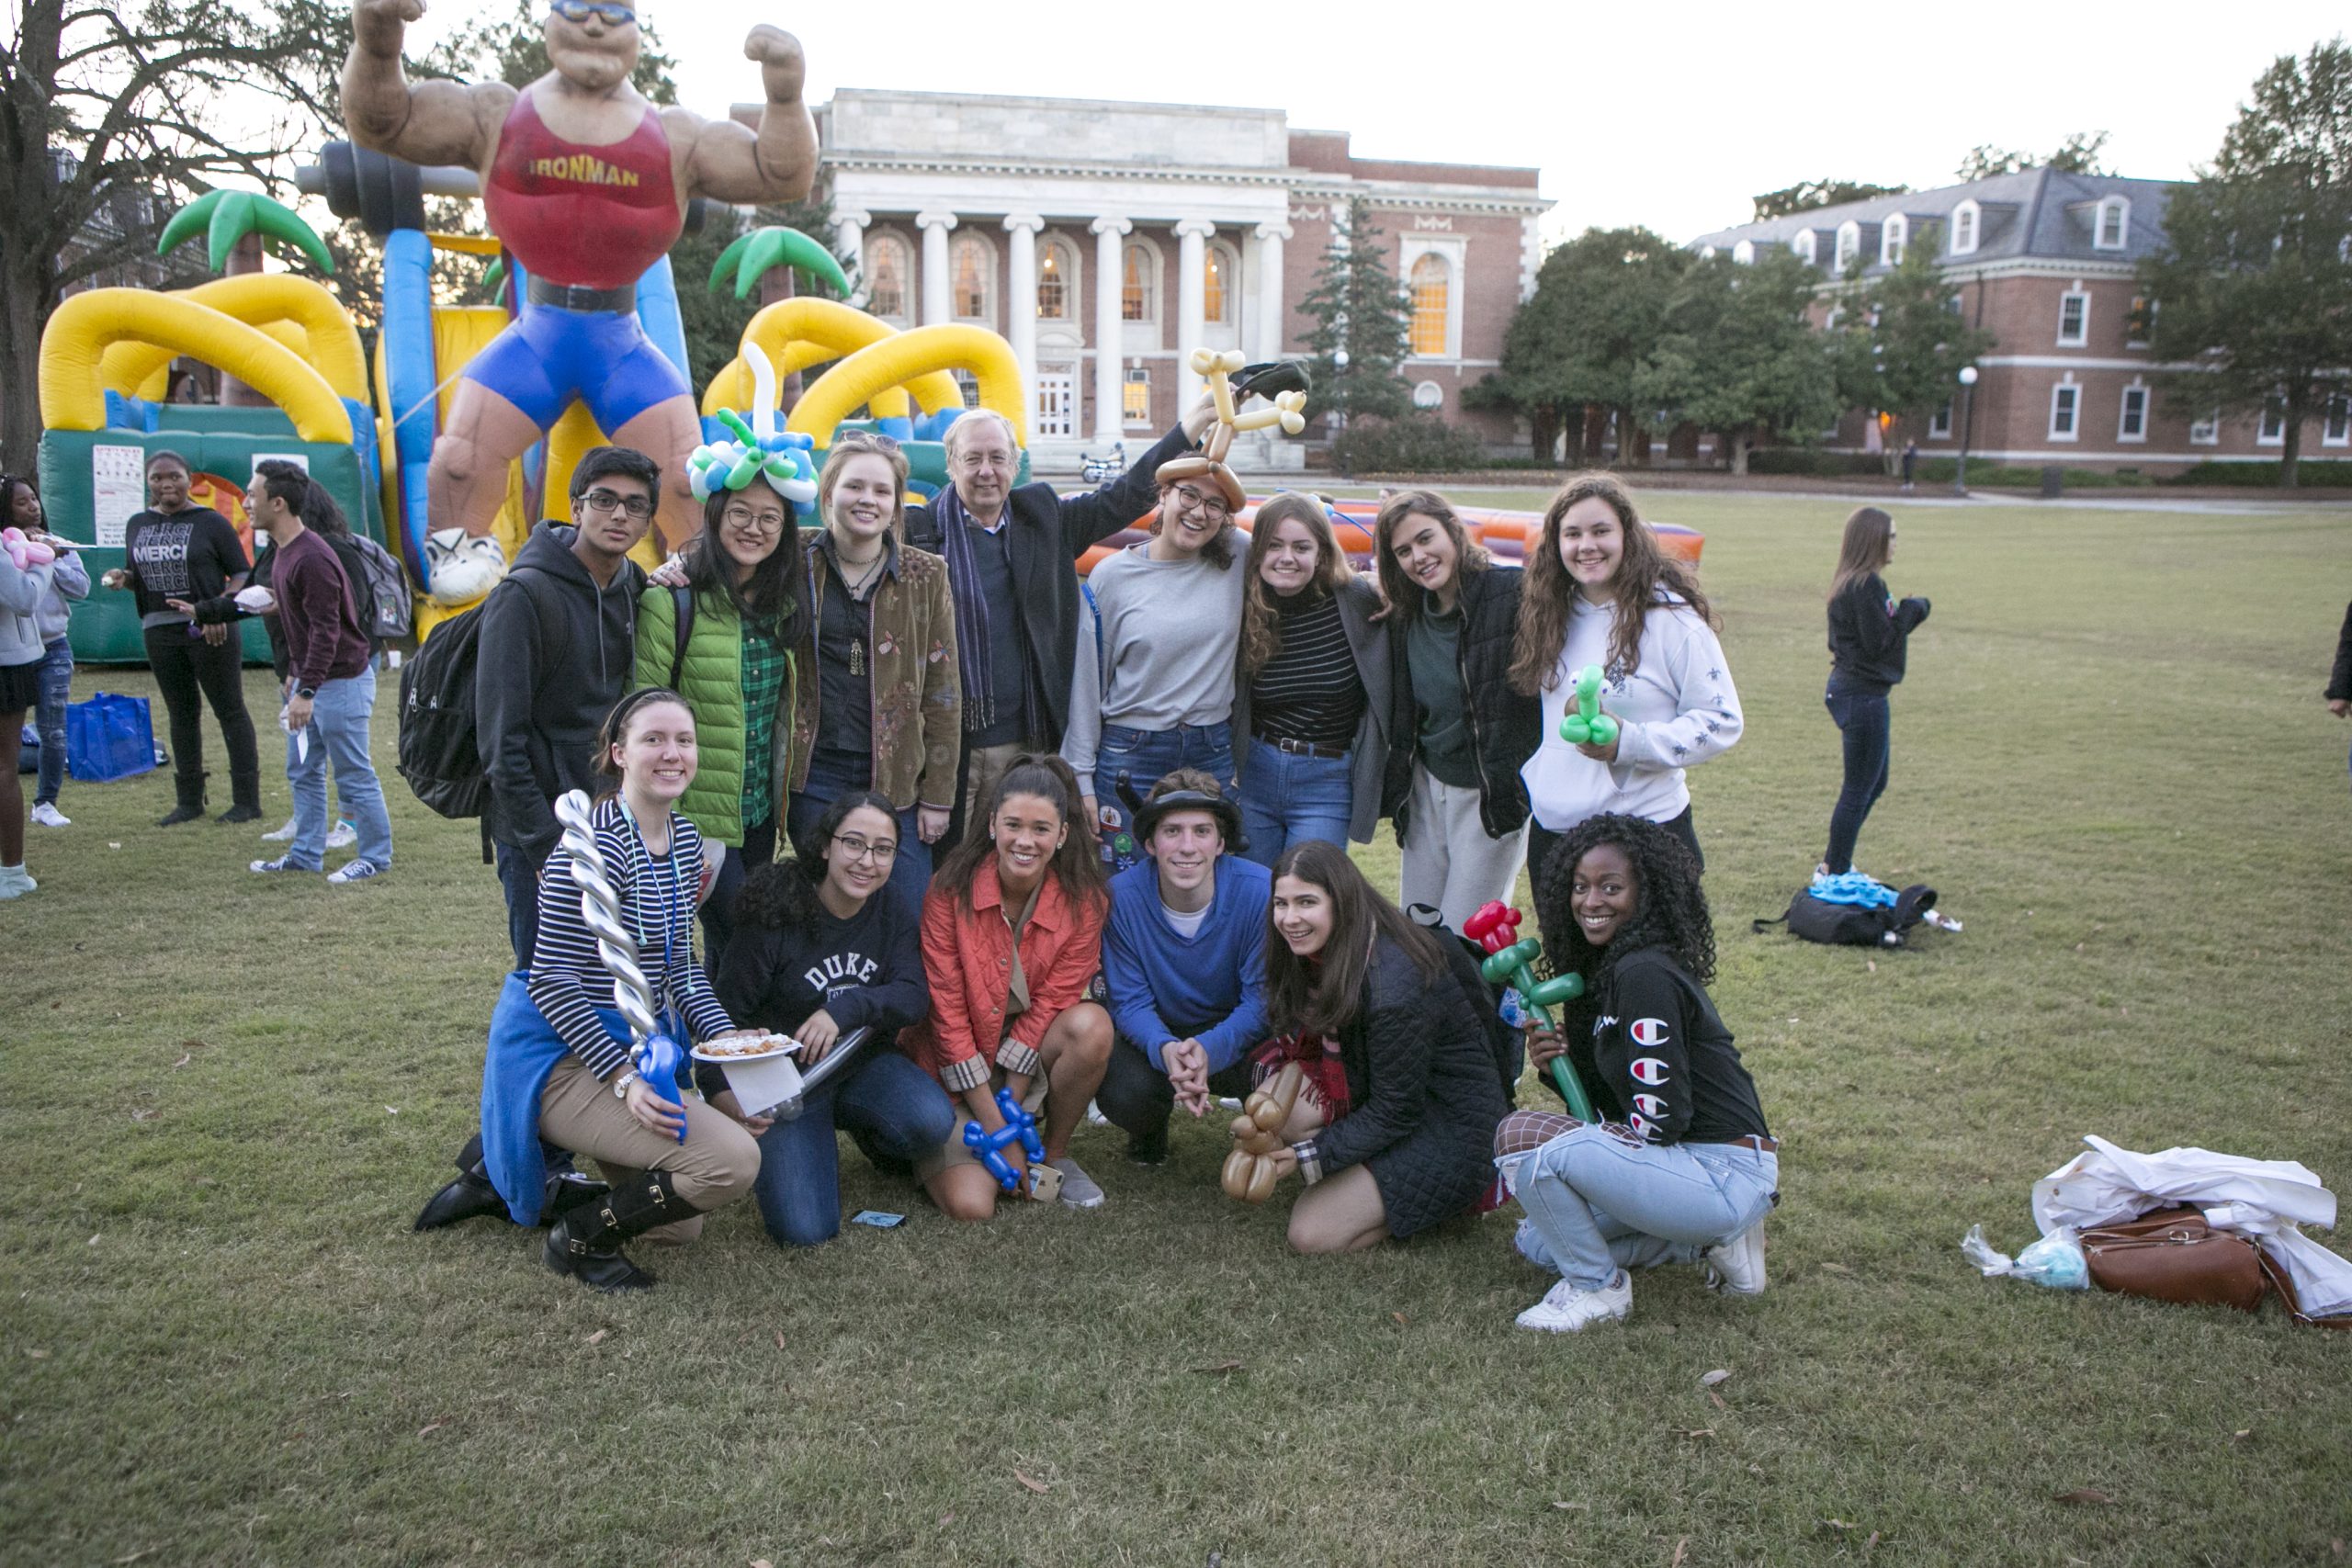 several students posing in front of an inflatable ride